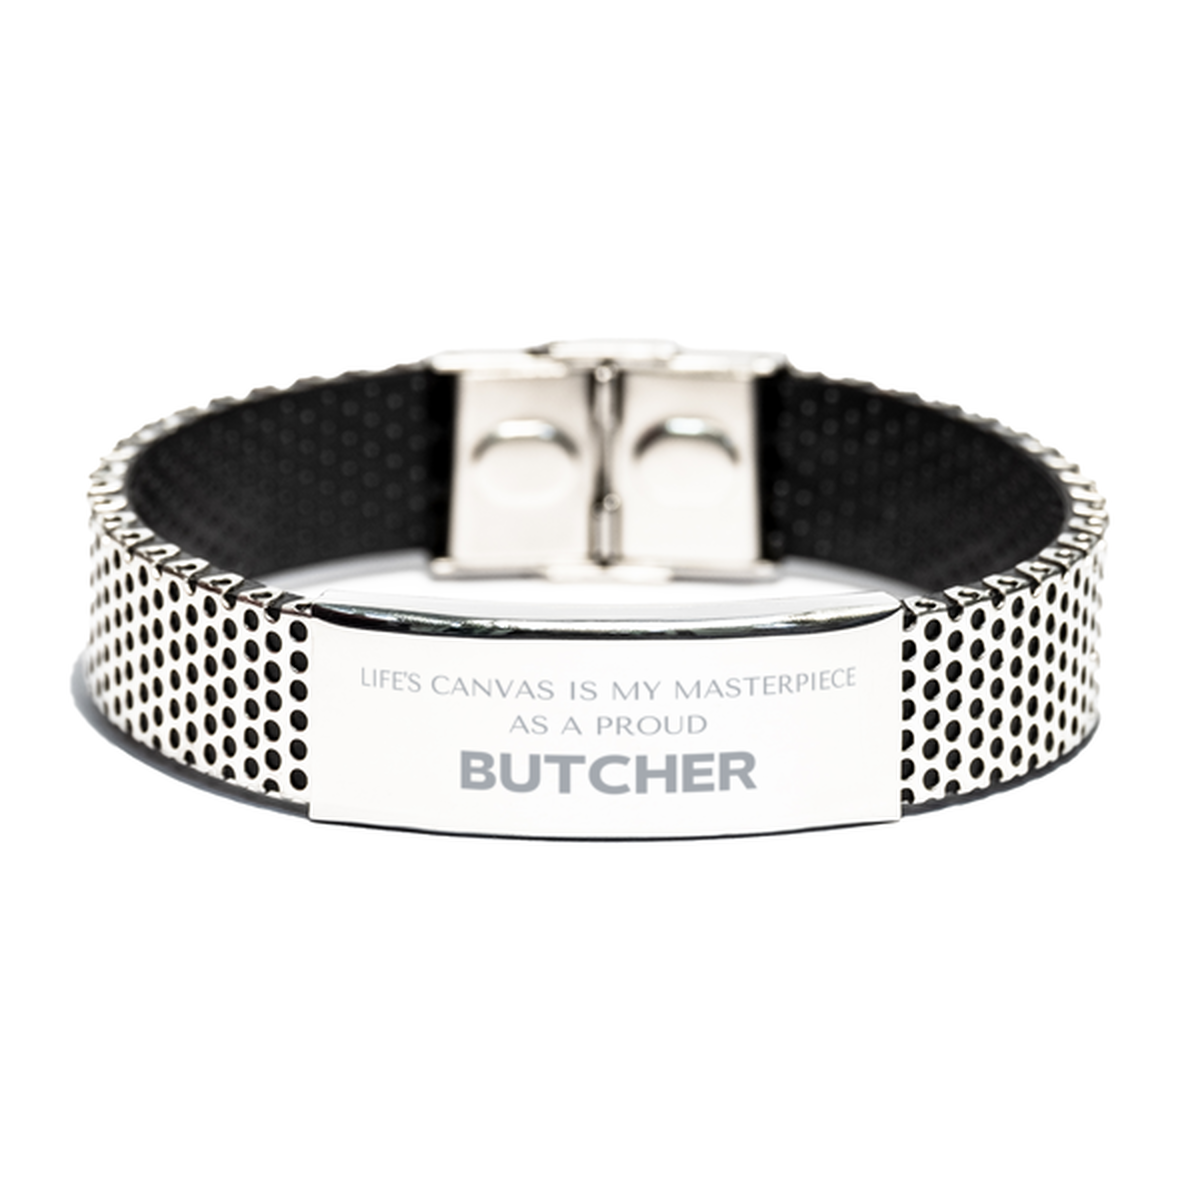 Proud Butcher Gifts, Life's canvas is my masterpiece, Epic Birthday Christmas Unique Stainless Steel Bracelet For Butcher, Coworkers, Men, Women, Friends